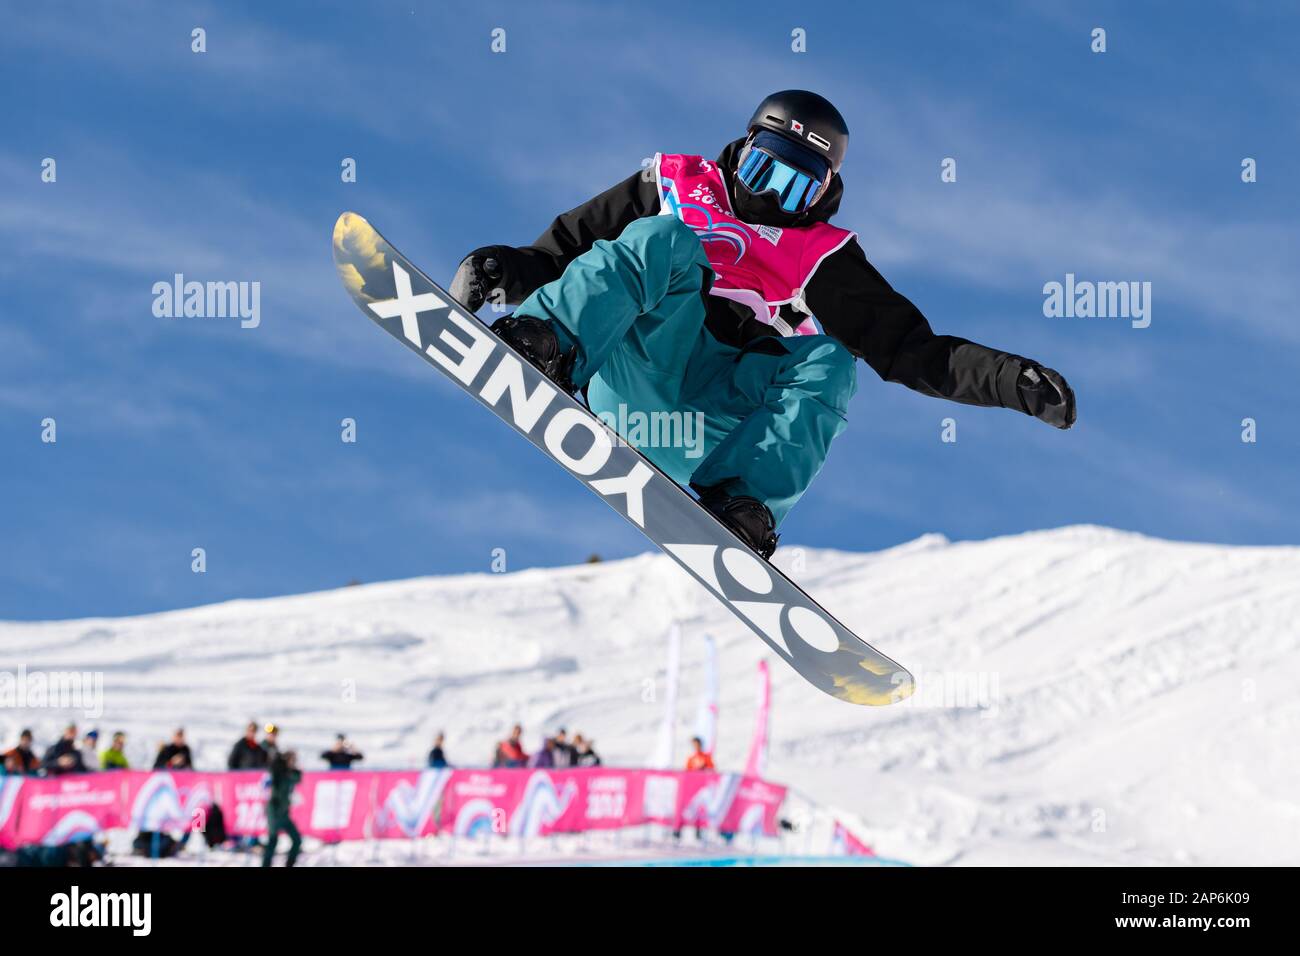 LAUSANNE, SWITZERLAND. 21th, Jan 2020. HIRANO Ruka (JPN) competes in the Men's Snowboard Halfpipe competitions during the Lausanne 2020 Youth Olympic Games at Leysin Park & Pipe on Tuesday, 21 January 2020. LAUSANNE, SWITZERLAND. Credit: Taka G Wu/Alamy Live News Stock Photo